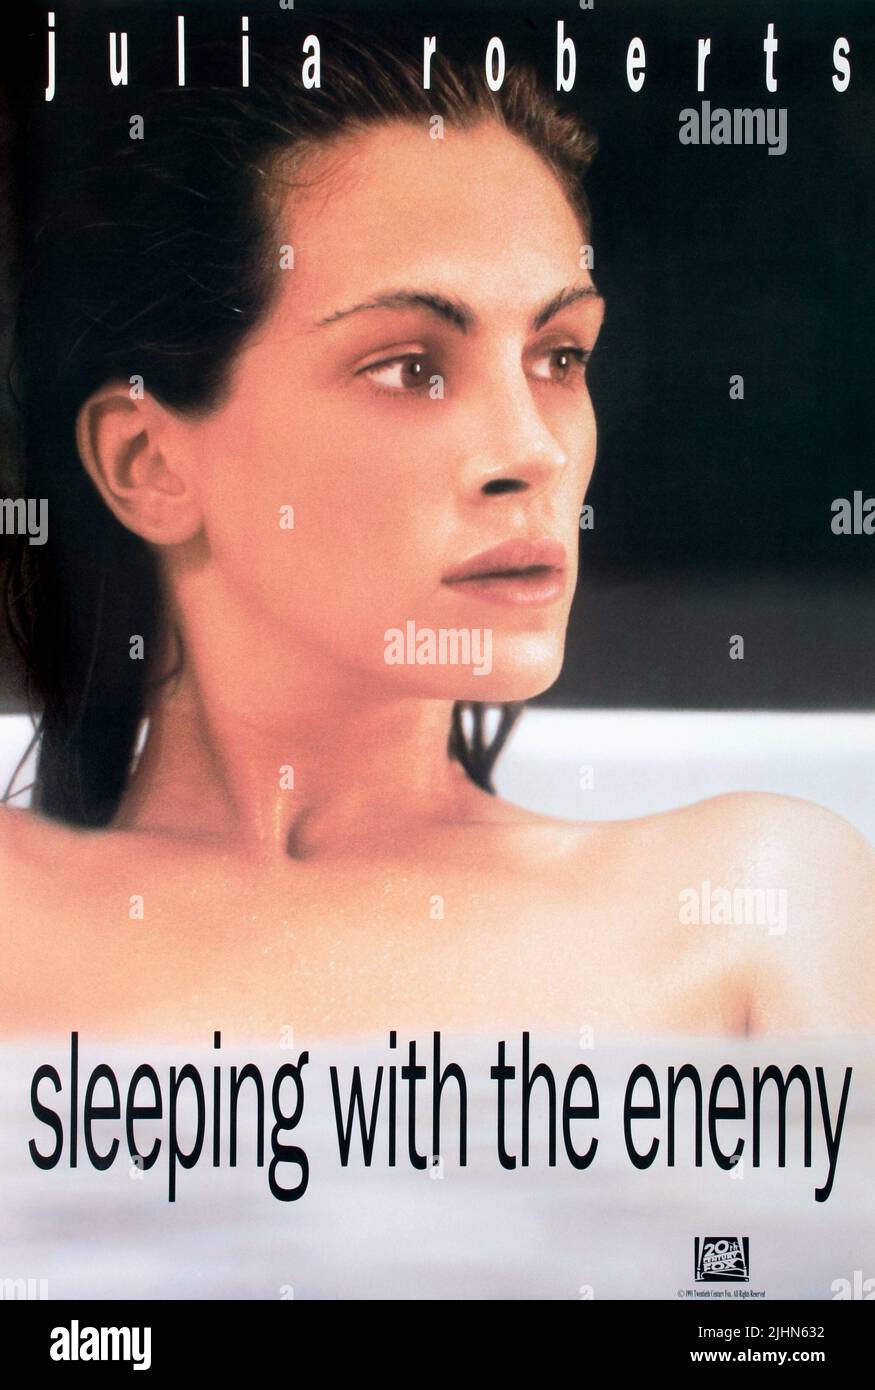 JULIA ROBERTS FILM POSTER, SLEEPING WITH THE ENEMY, 1991 Stock Photo